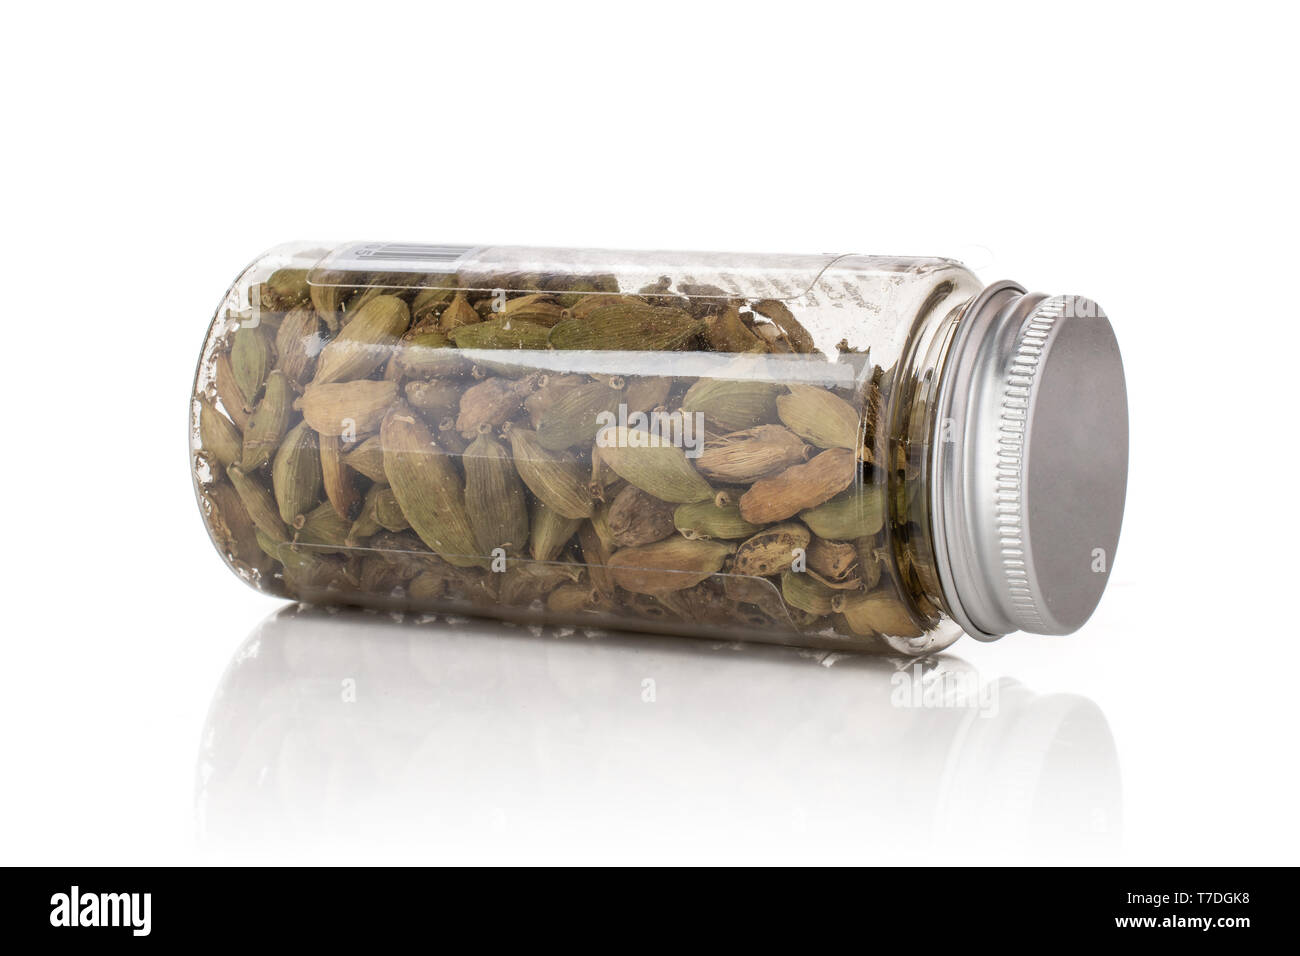 Lot of whole true cardamom pod lying on its side in a plastic bottle isolated on white background Stock Photo